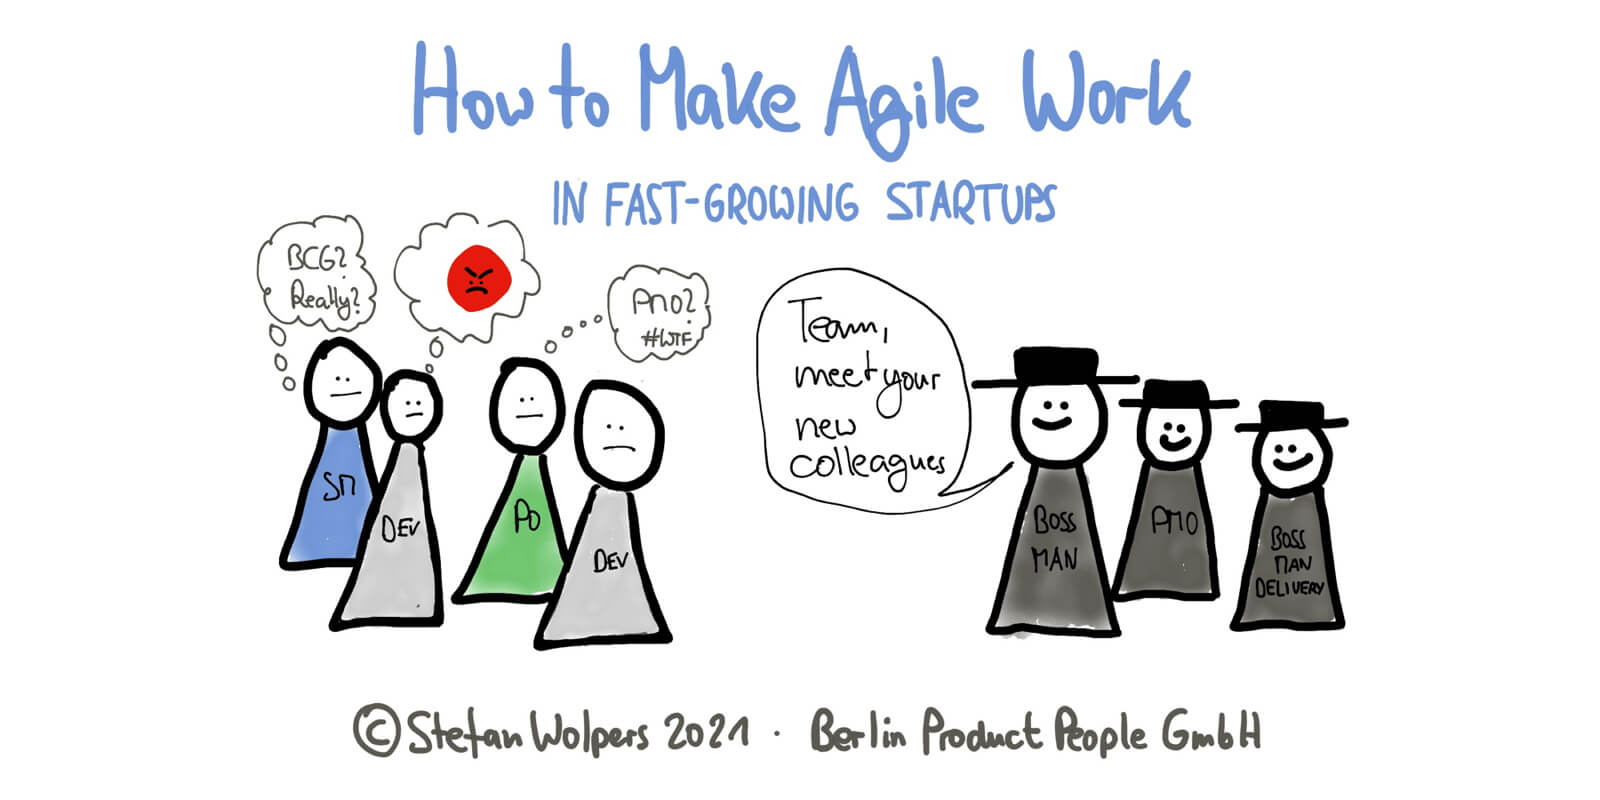 How to Make Agile Work in Fast-Growing Startups — Age-of-Product.com